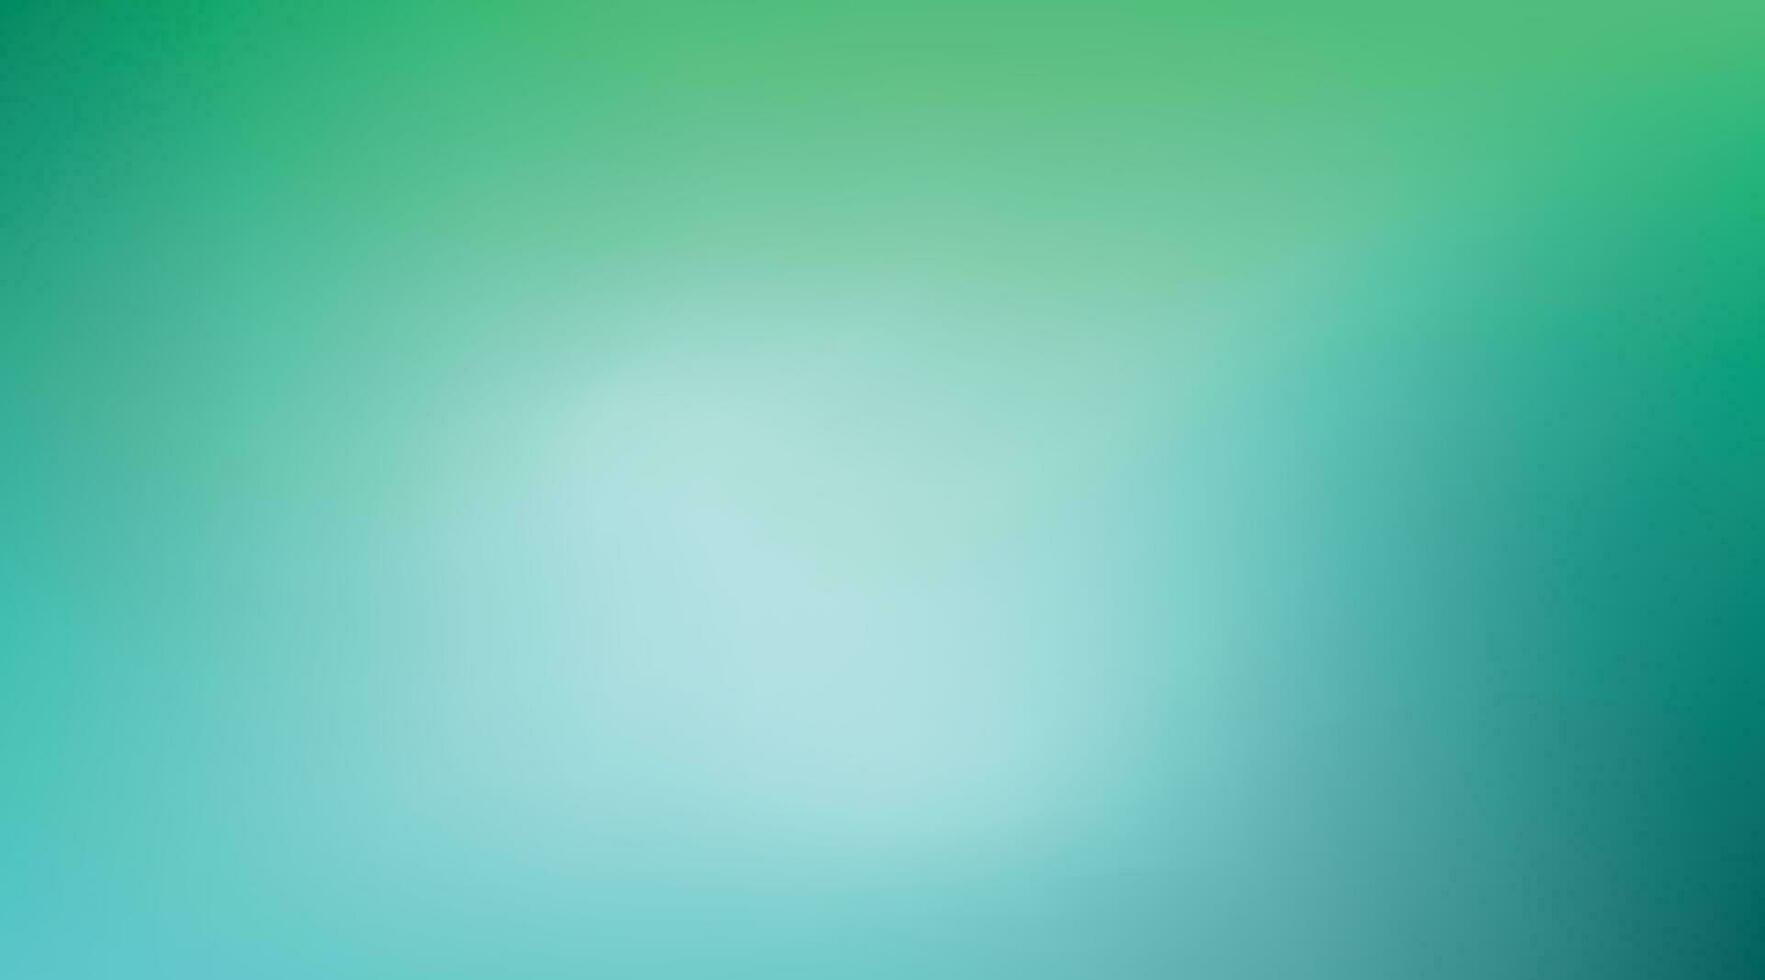 Abstract green and blue blurred gradient background. Light color nature blur pattern. Vector eco illustration. Ecology, summer, spring, grass, soft concept. Graphic design for banner or poster. EPS 10